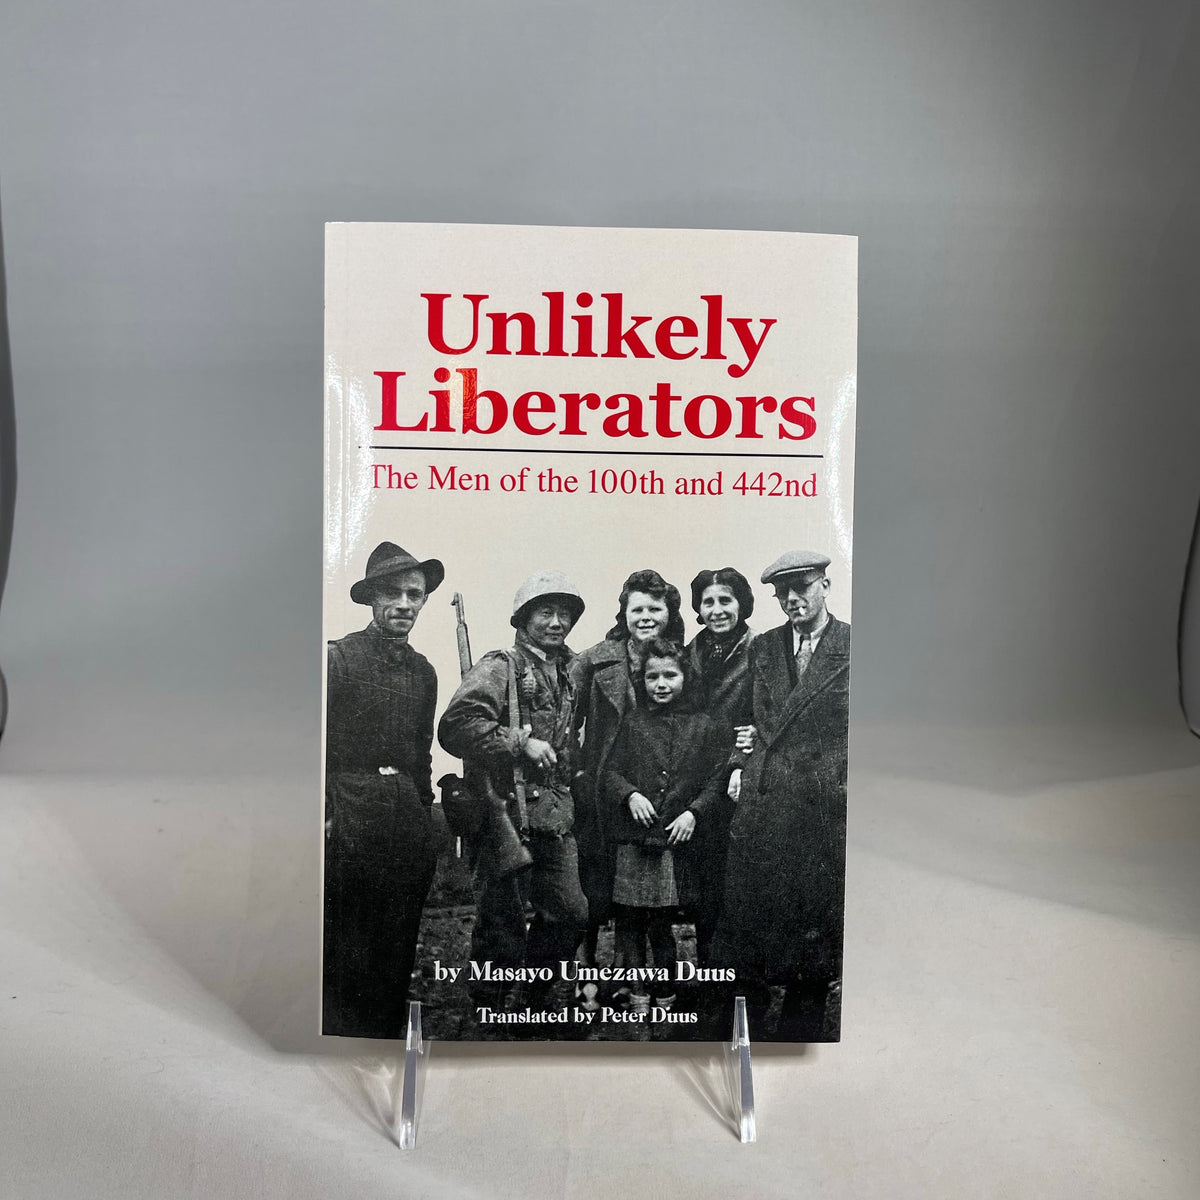 Unlikely Liberators - The Men of the 100th and 442nd